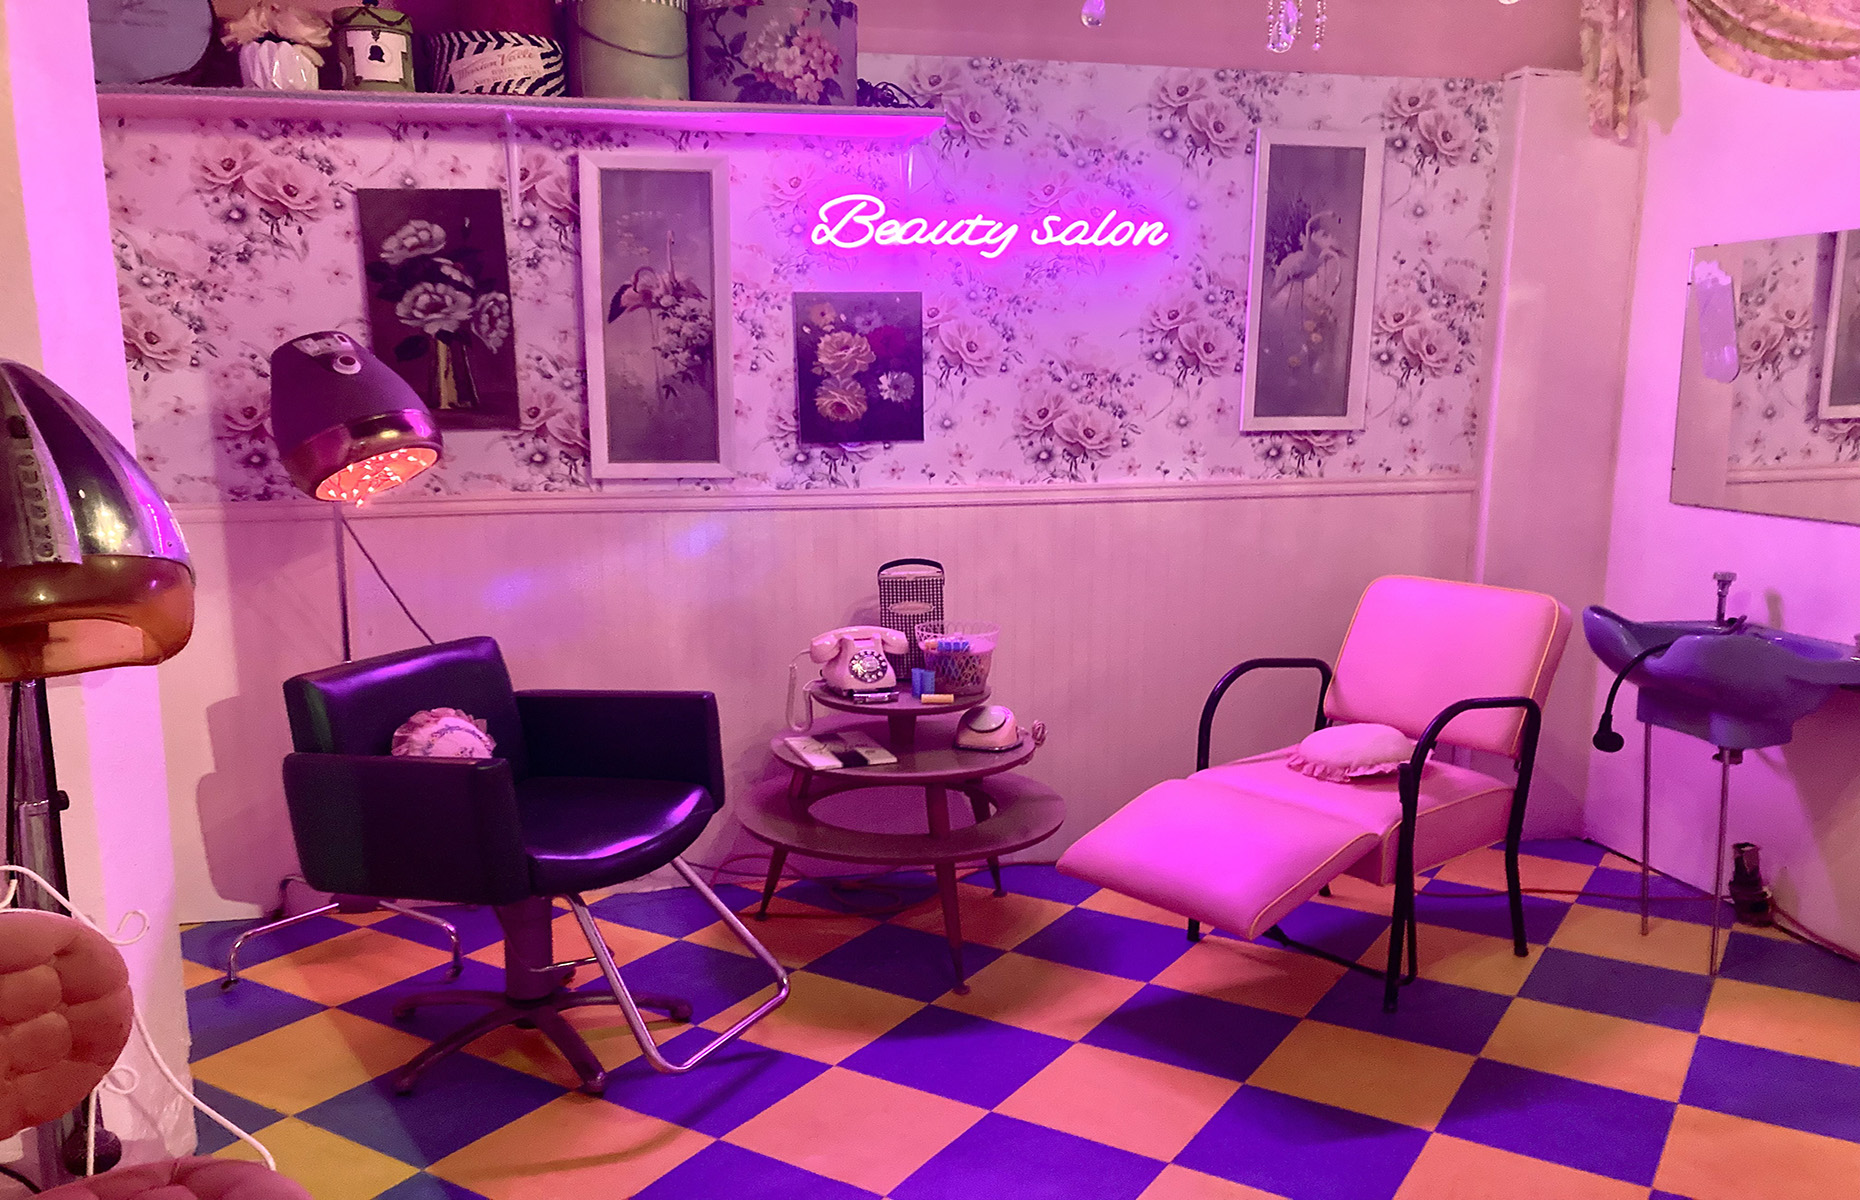 Salon at the Modernism Museum, Palm Springs. (Image: Zoey Goto)